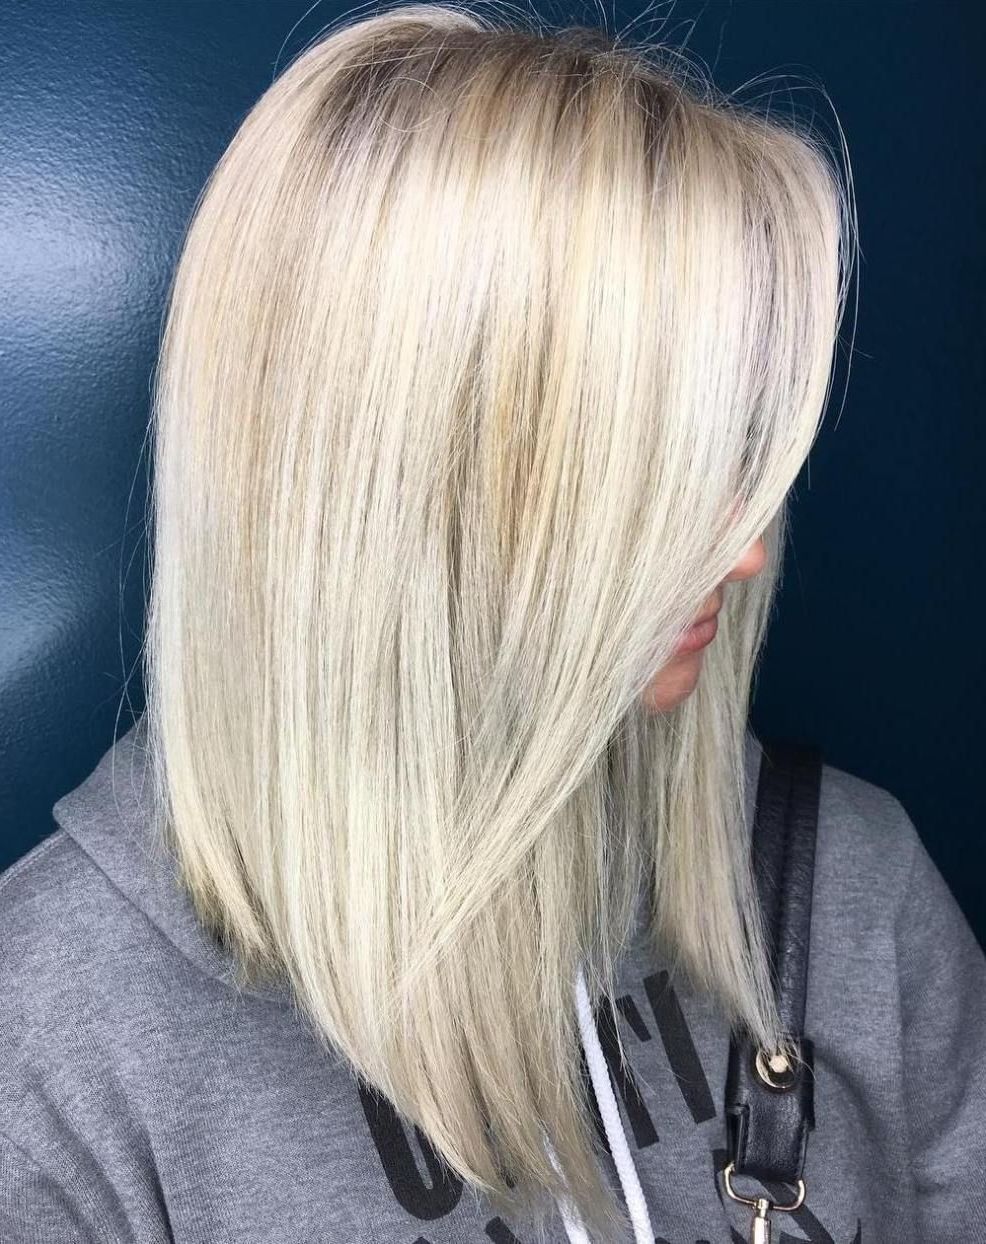 40 Styles With Medium Blonde Hair For Major Inspiration (View 3 of 20)